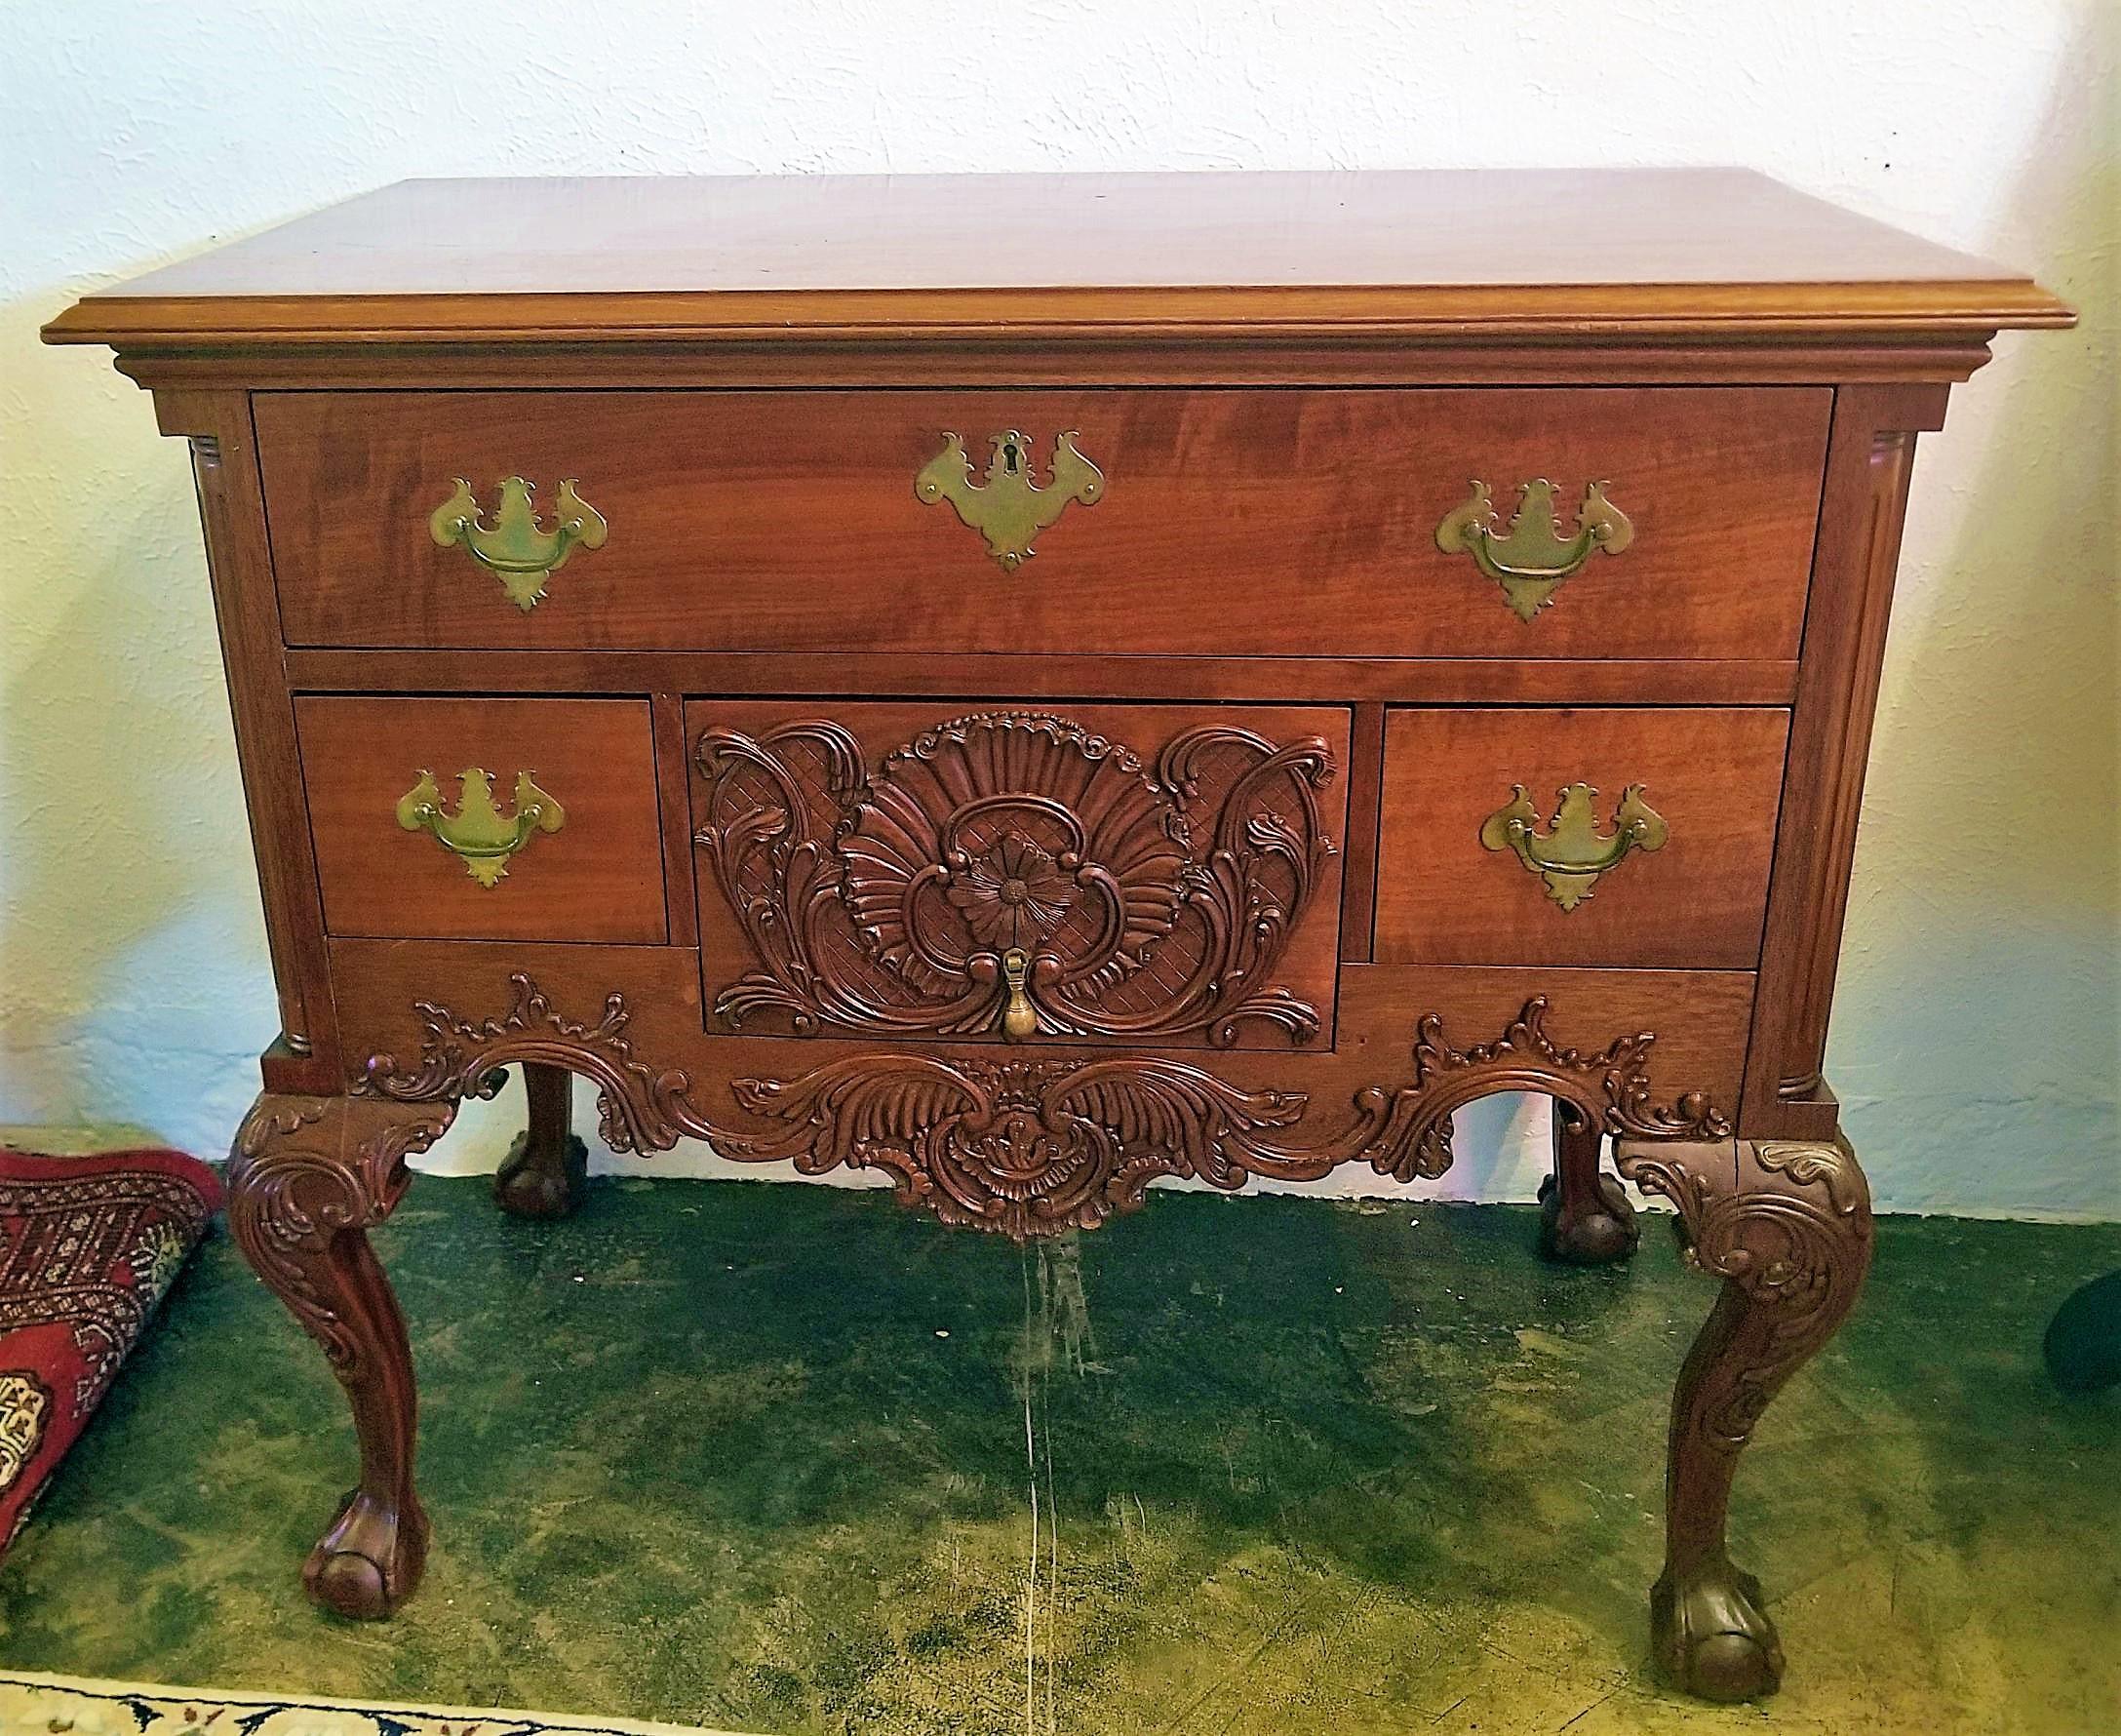 Presenting an exceptional quality American Chippendale style mahogany lowboy table.

Beautifully handmade or crafted. Fabulous detail to the carving with glorious dovetailing, etc.

Handmade, probably in the early 20th century, circa 1920.

In